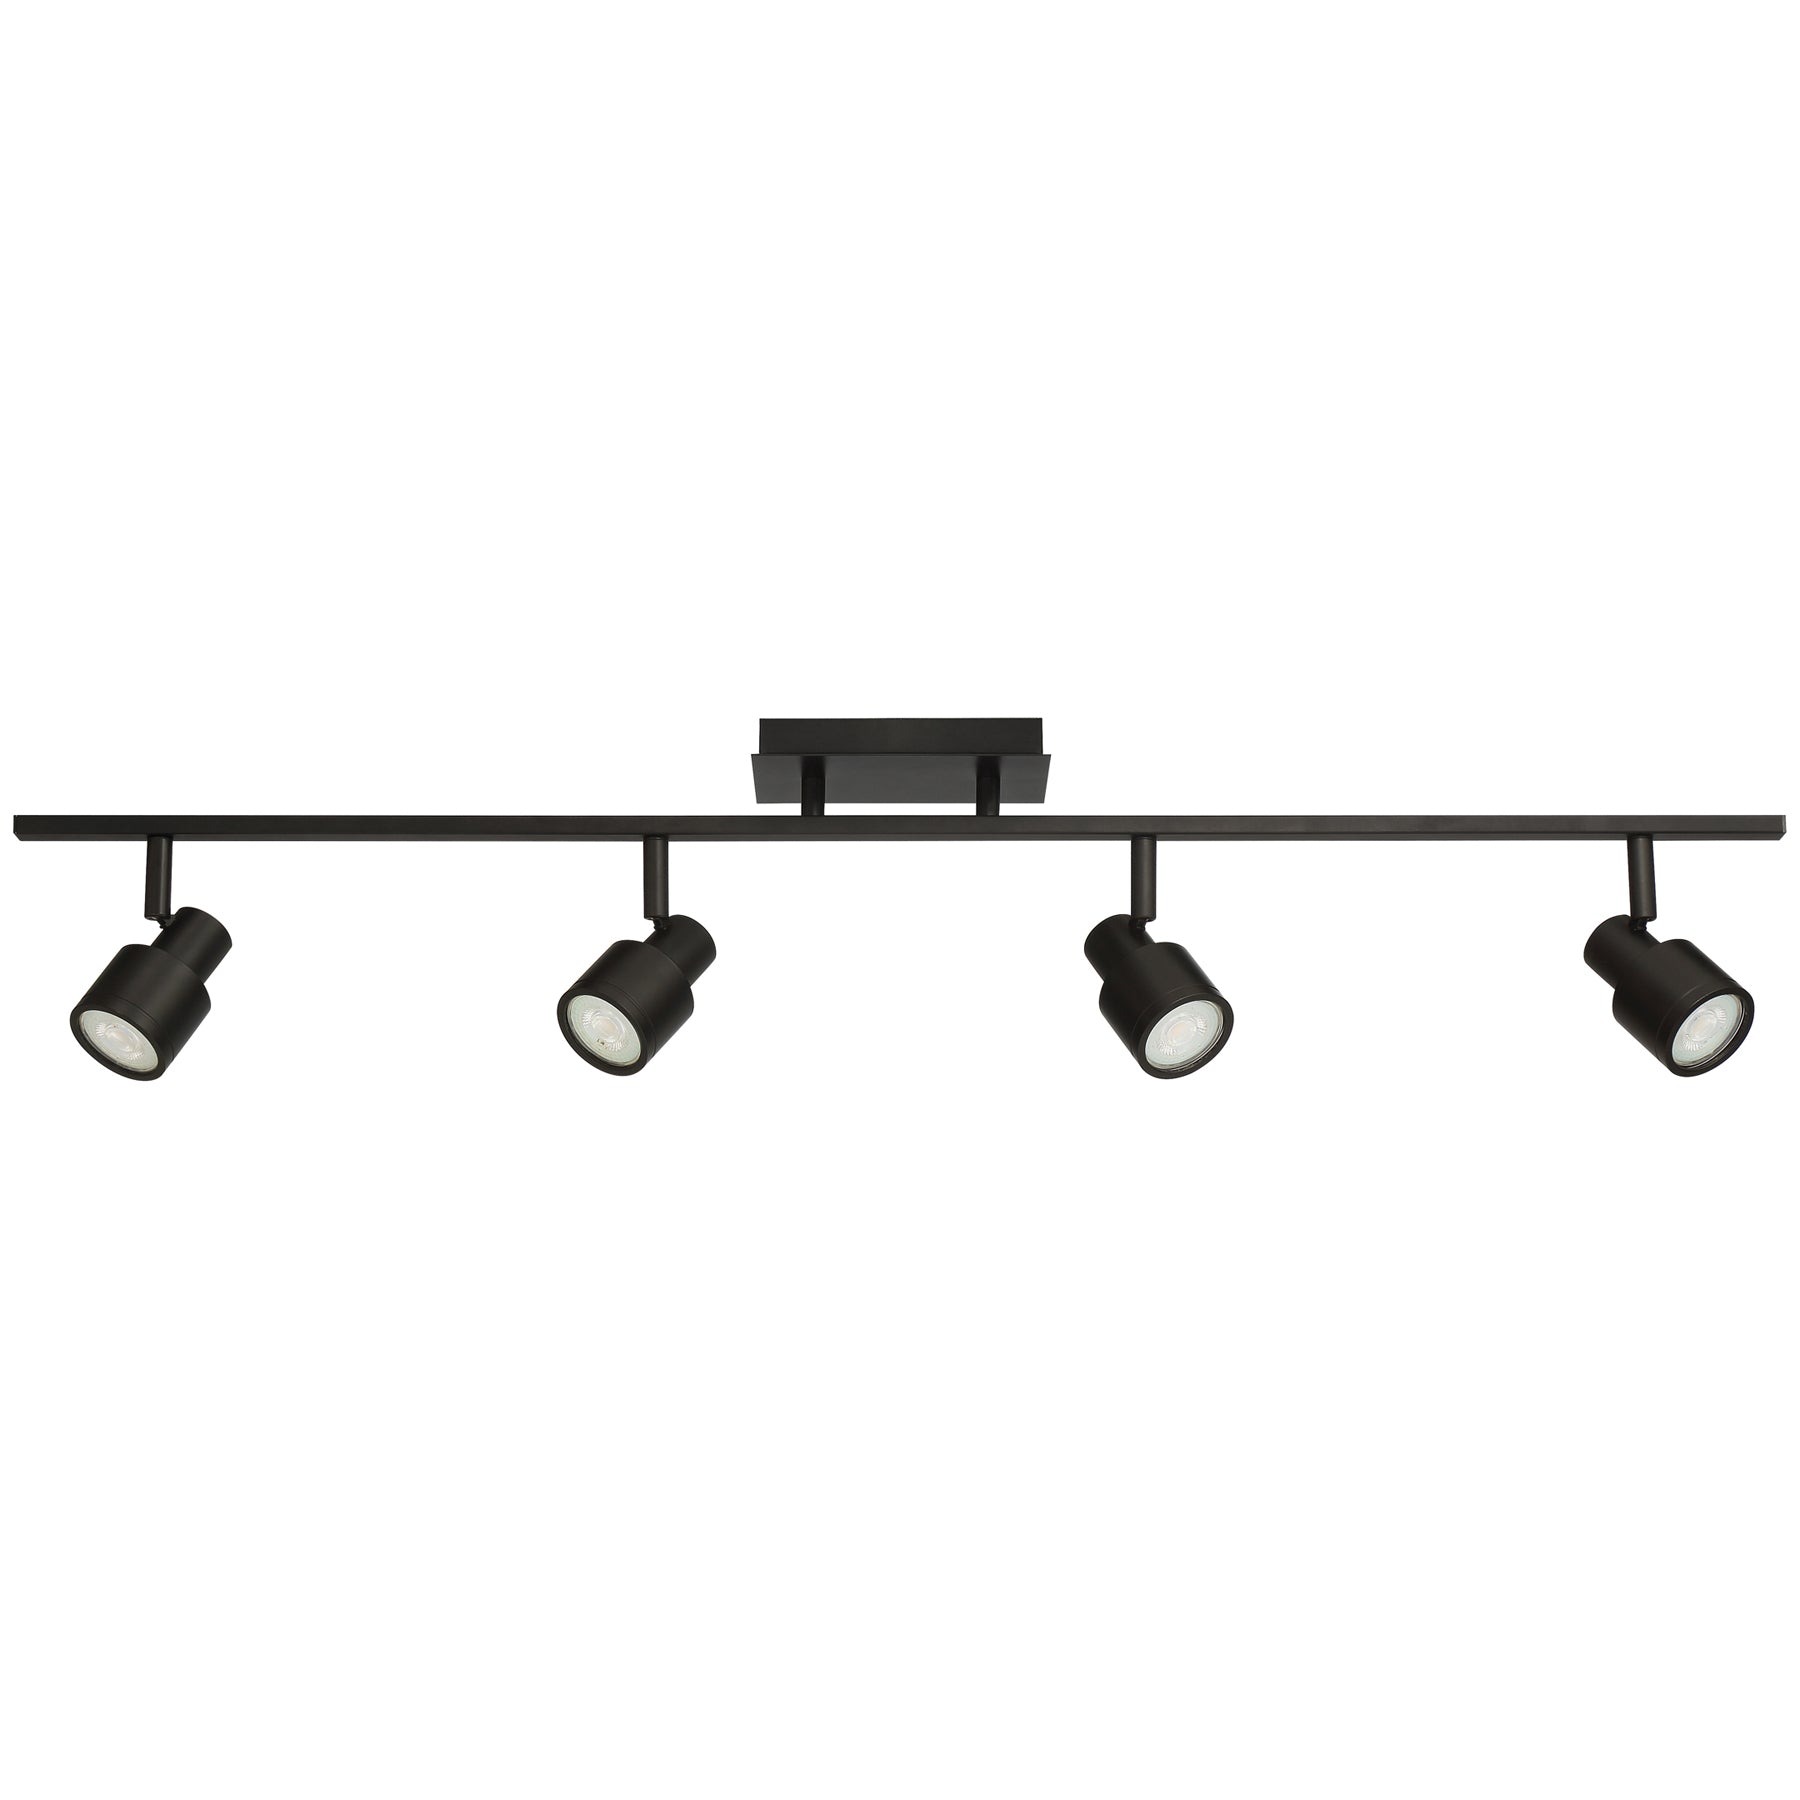  View details for Lincoln 6.5" LED Modern Track Lighting Fixture Matte Black Lincoln 6.5" LED Modern Track Lighting Fixture Matte Black